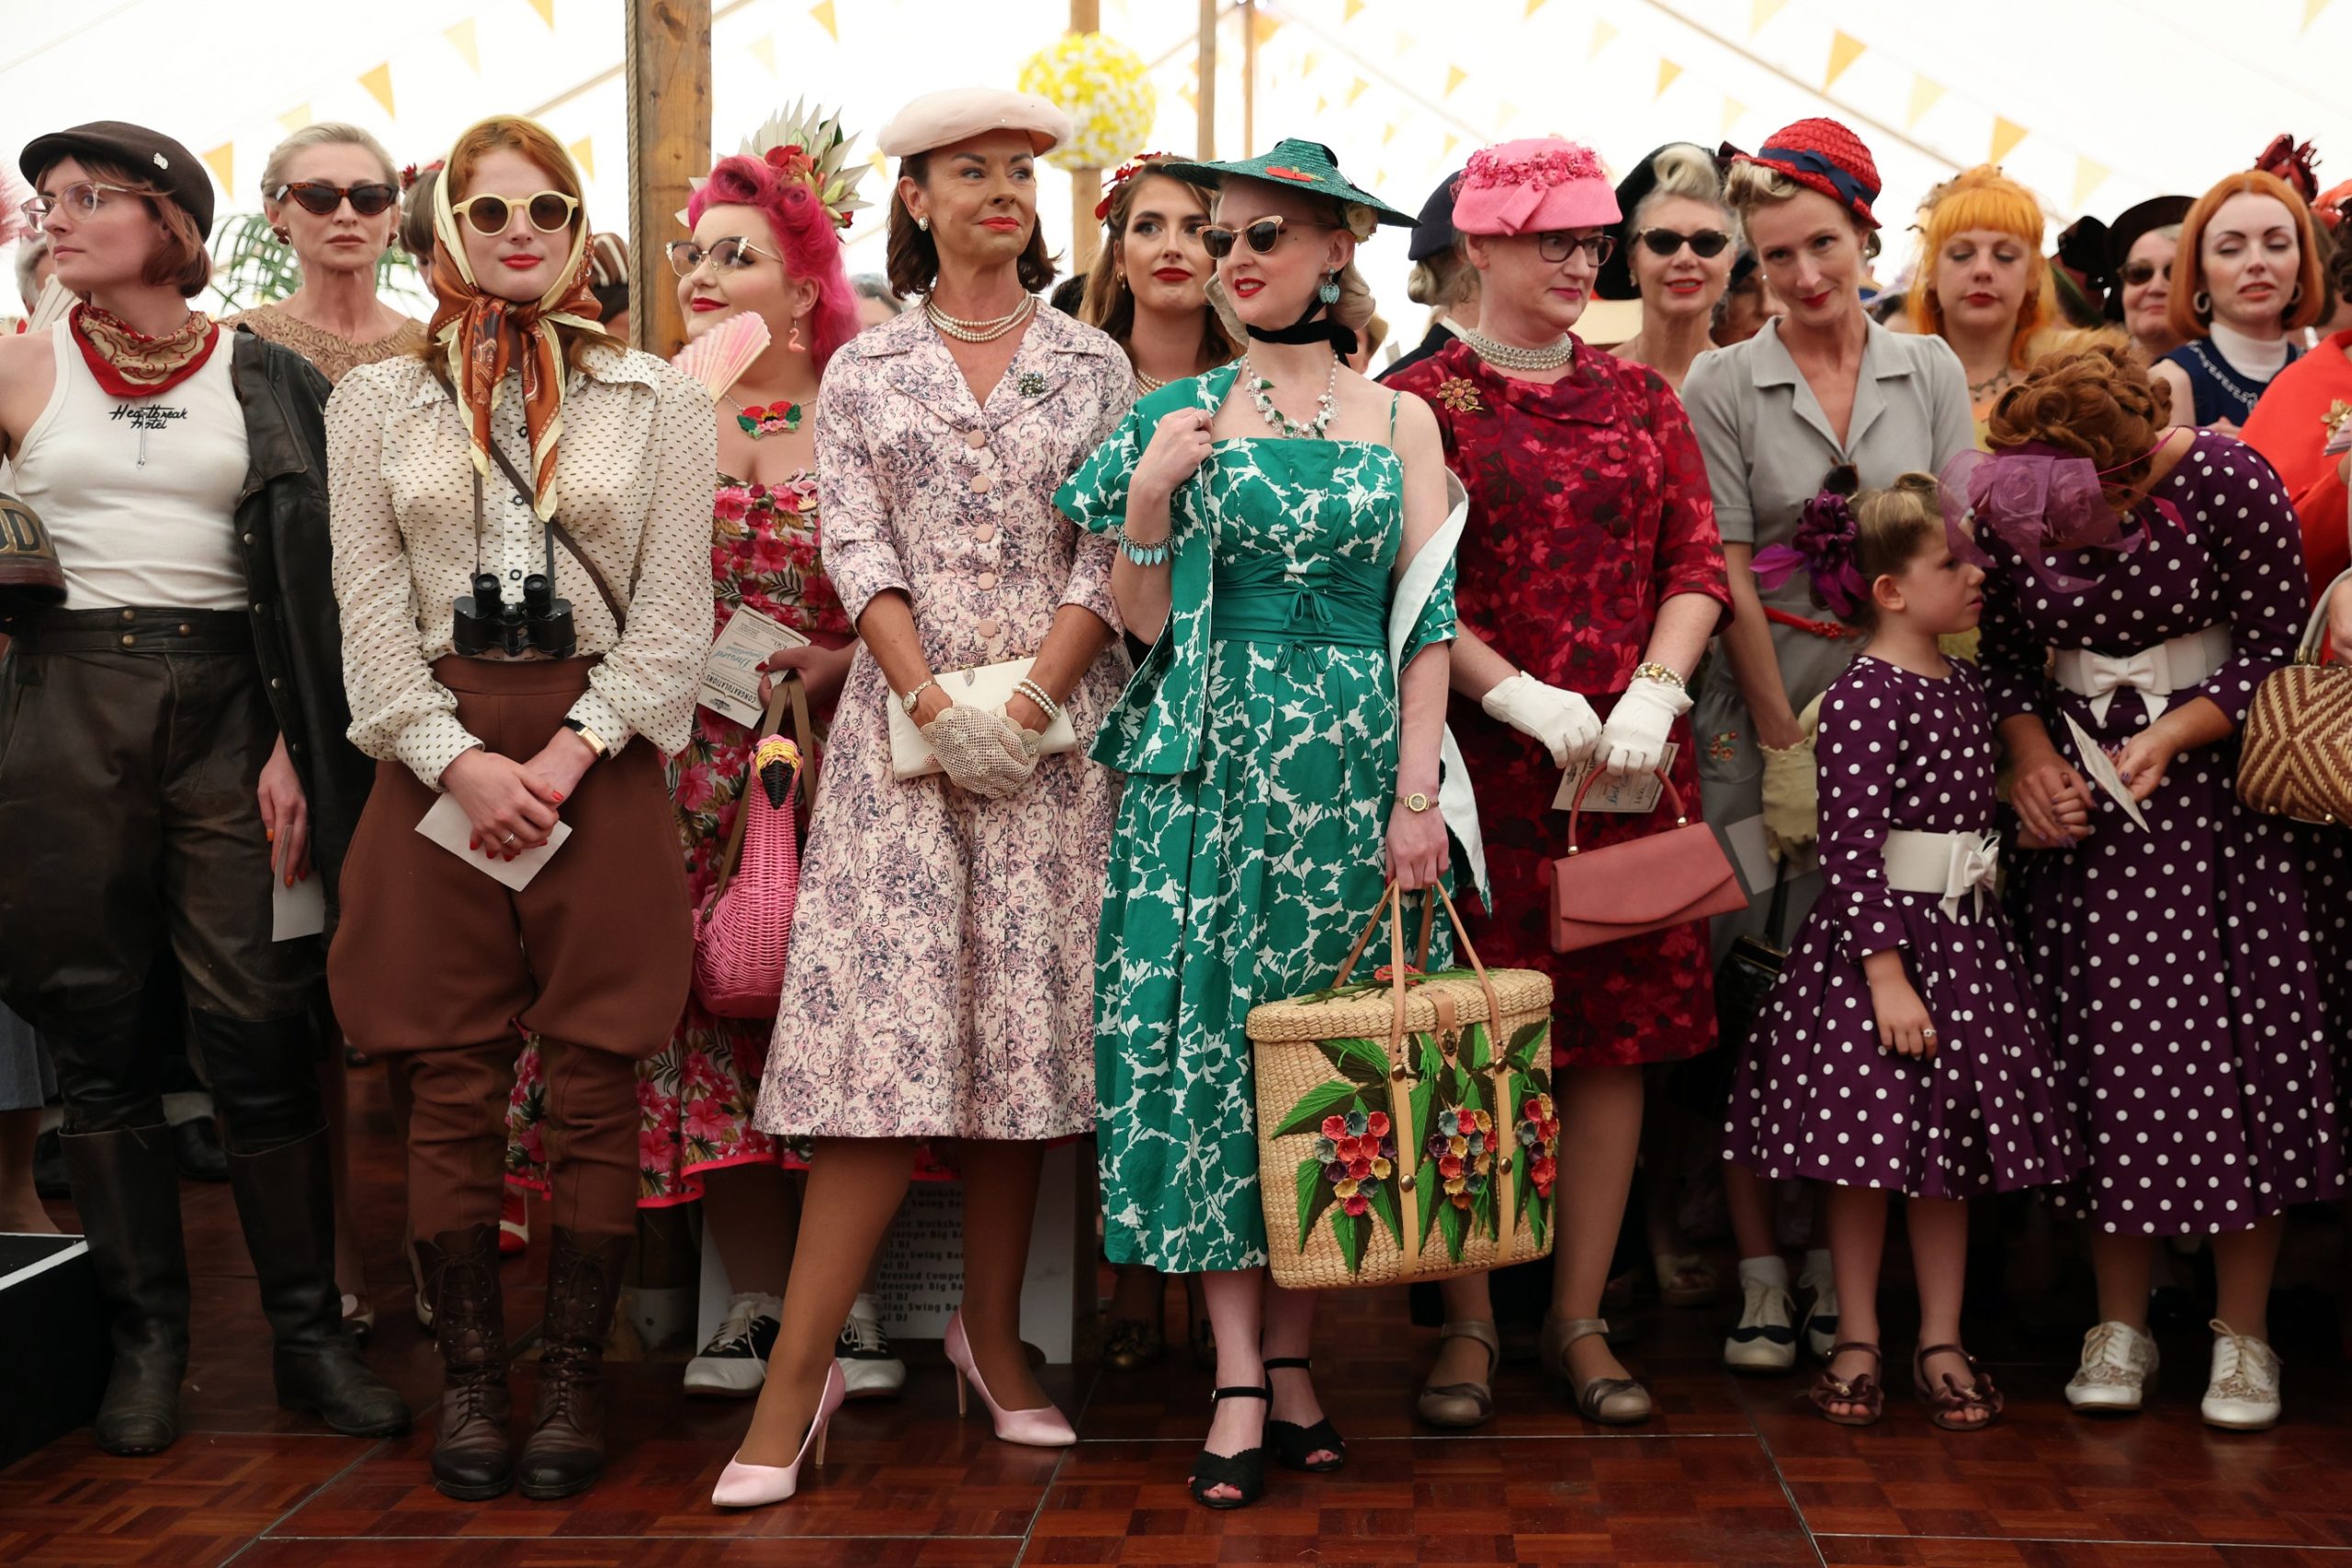 Setting the scene with the women behind the Goodwood Revival